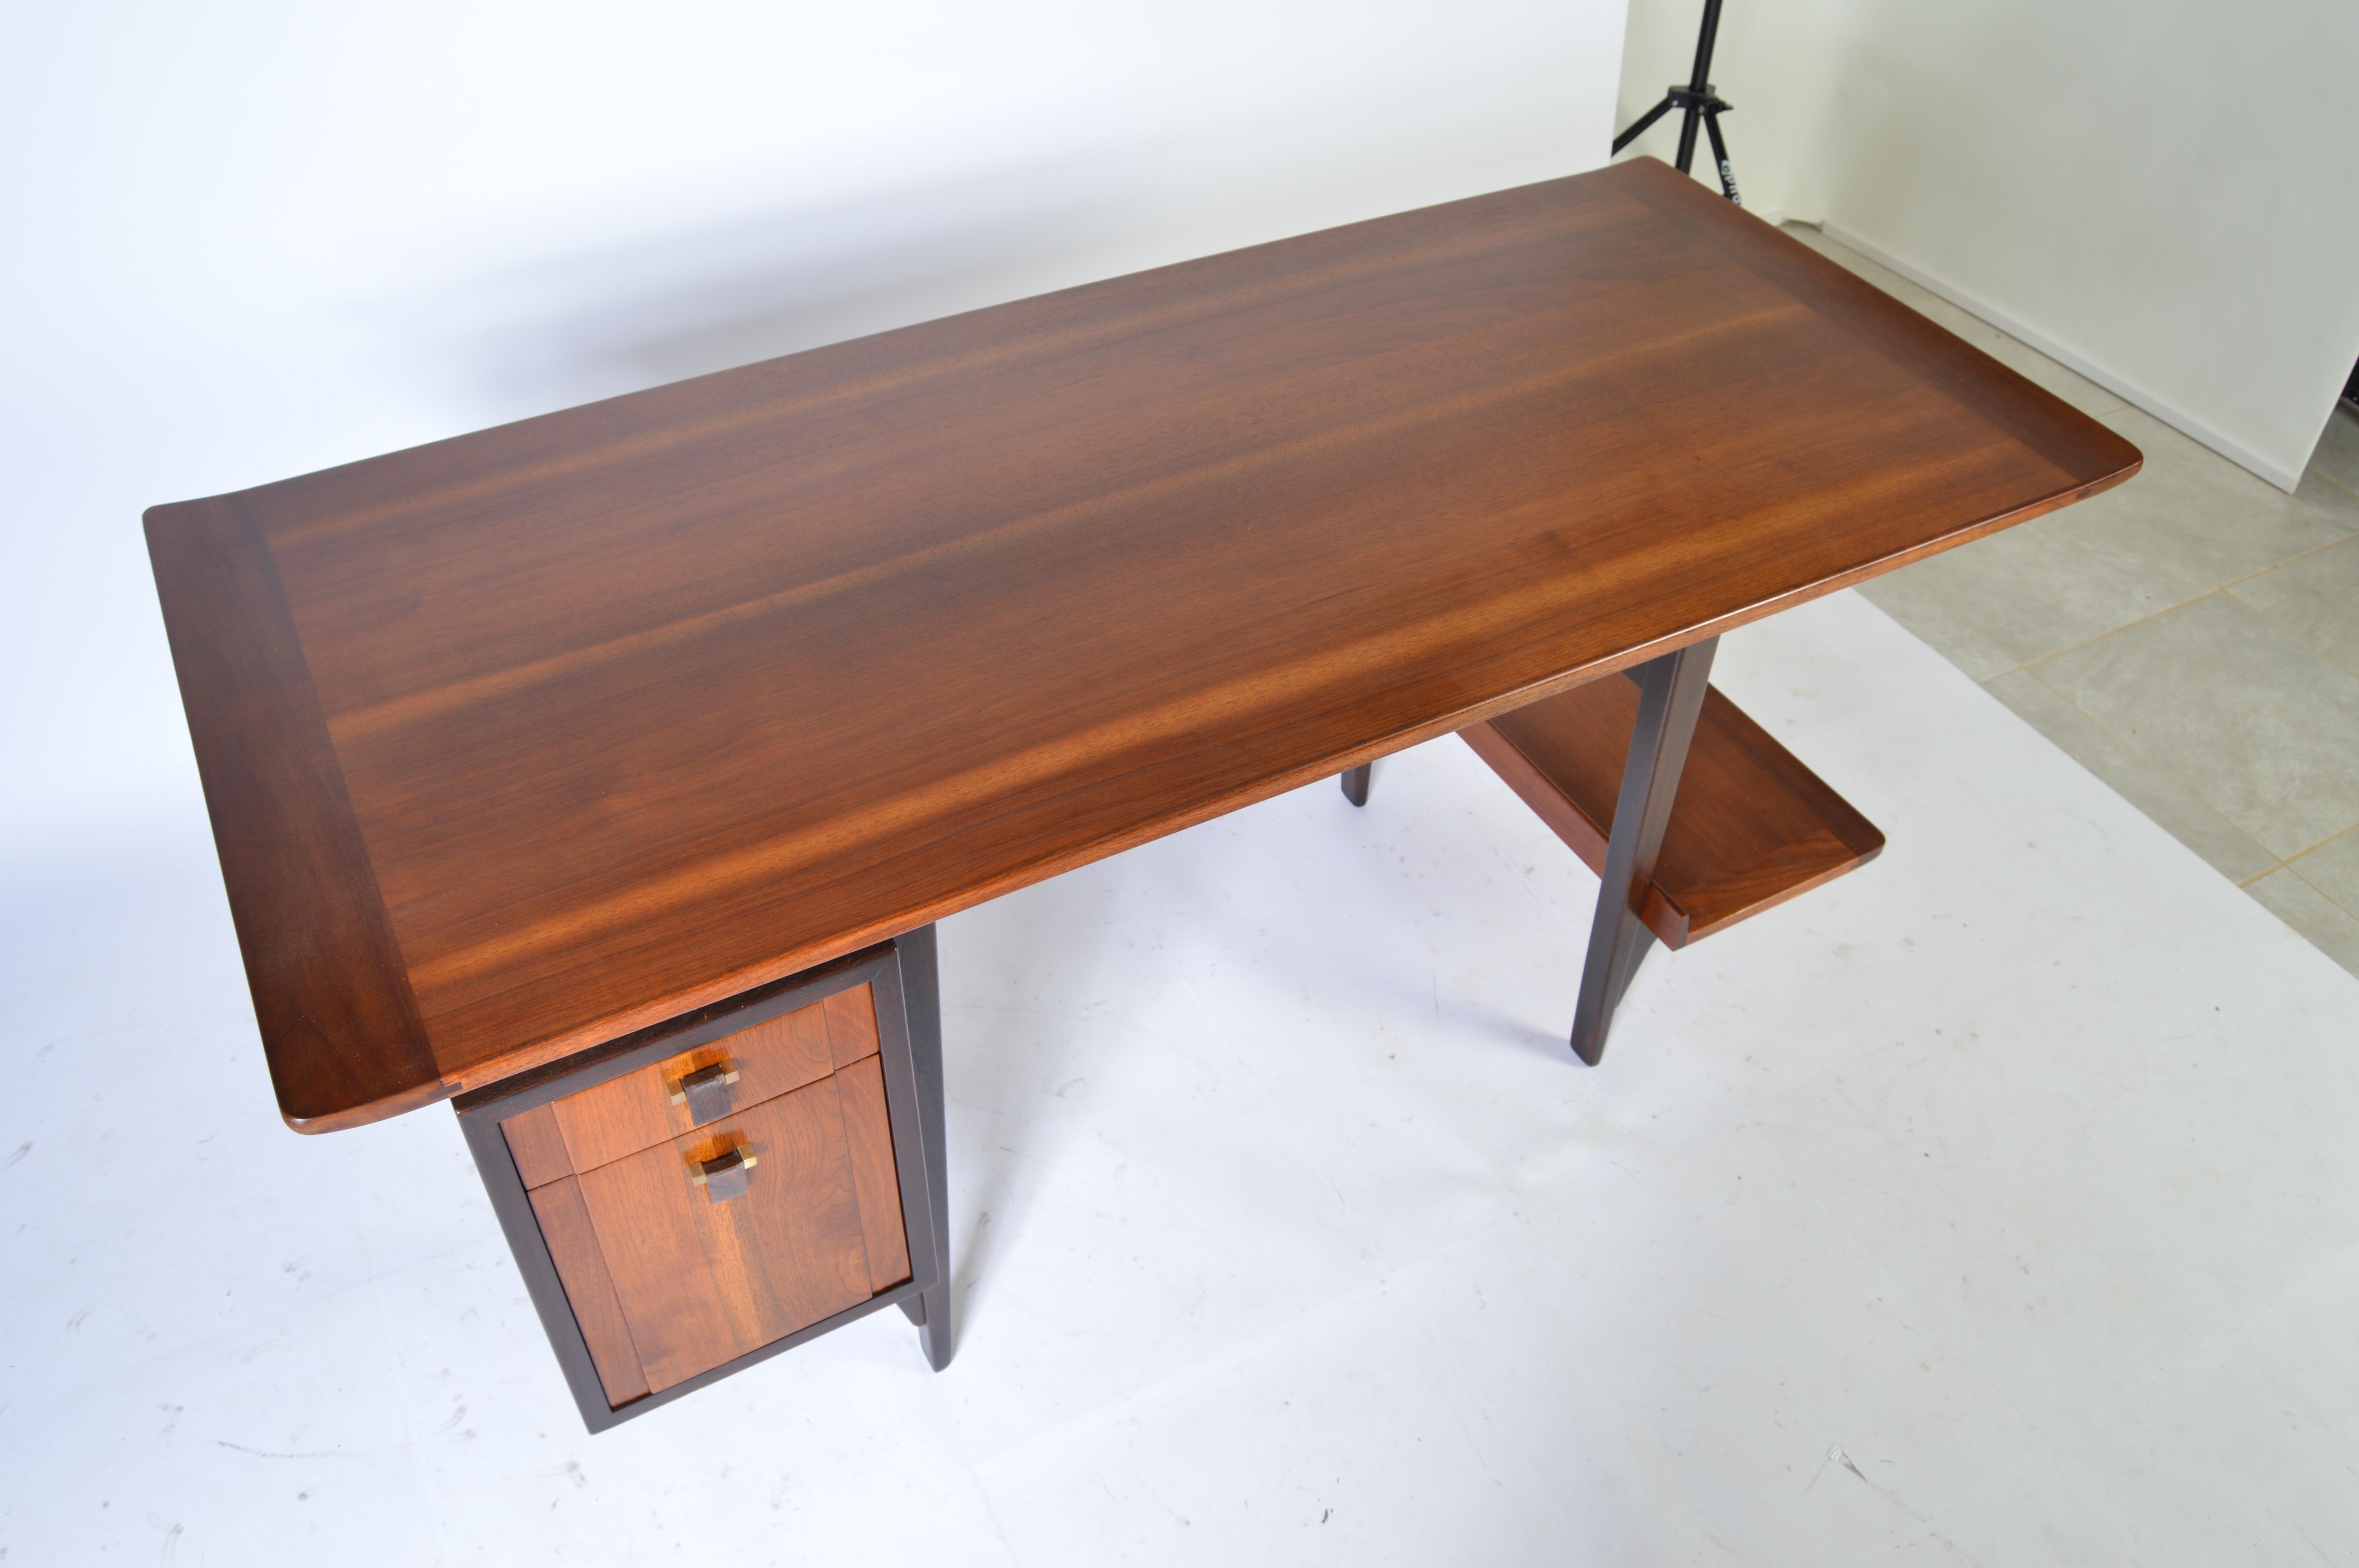 A rare masterfully designed writing desk designed by Edward Wormley having a single bank of drawers, lap pencil drawer and display shelf.
A combined construction of walnut, rosewood and brass hinged rosewood pull tabs make this desk stand out above